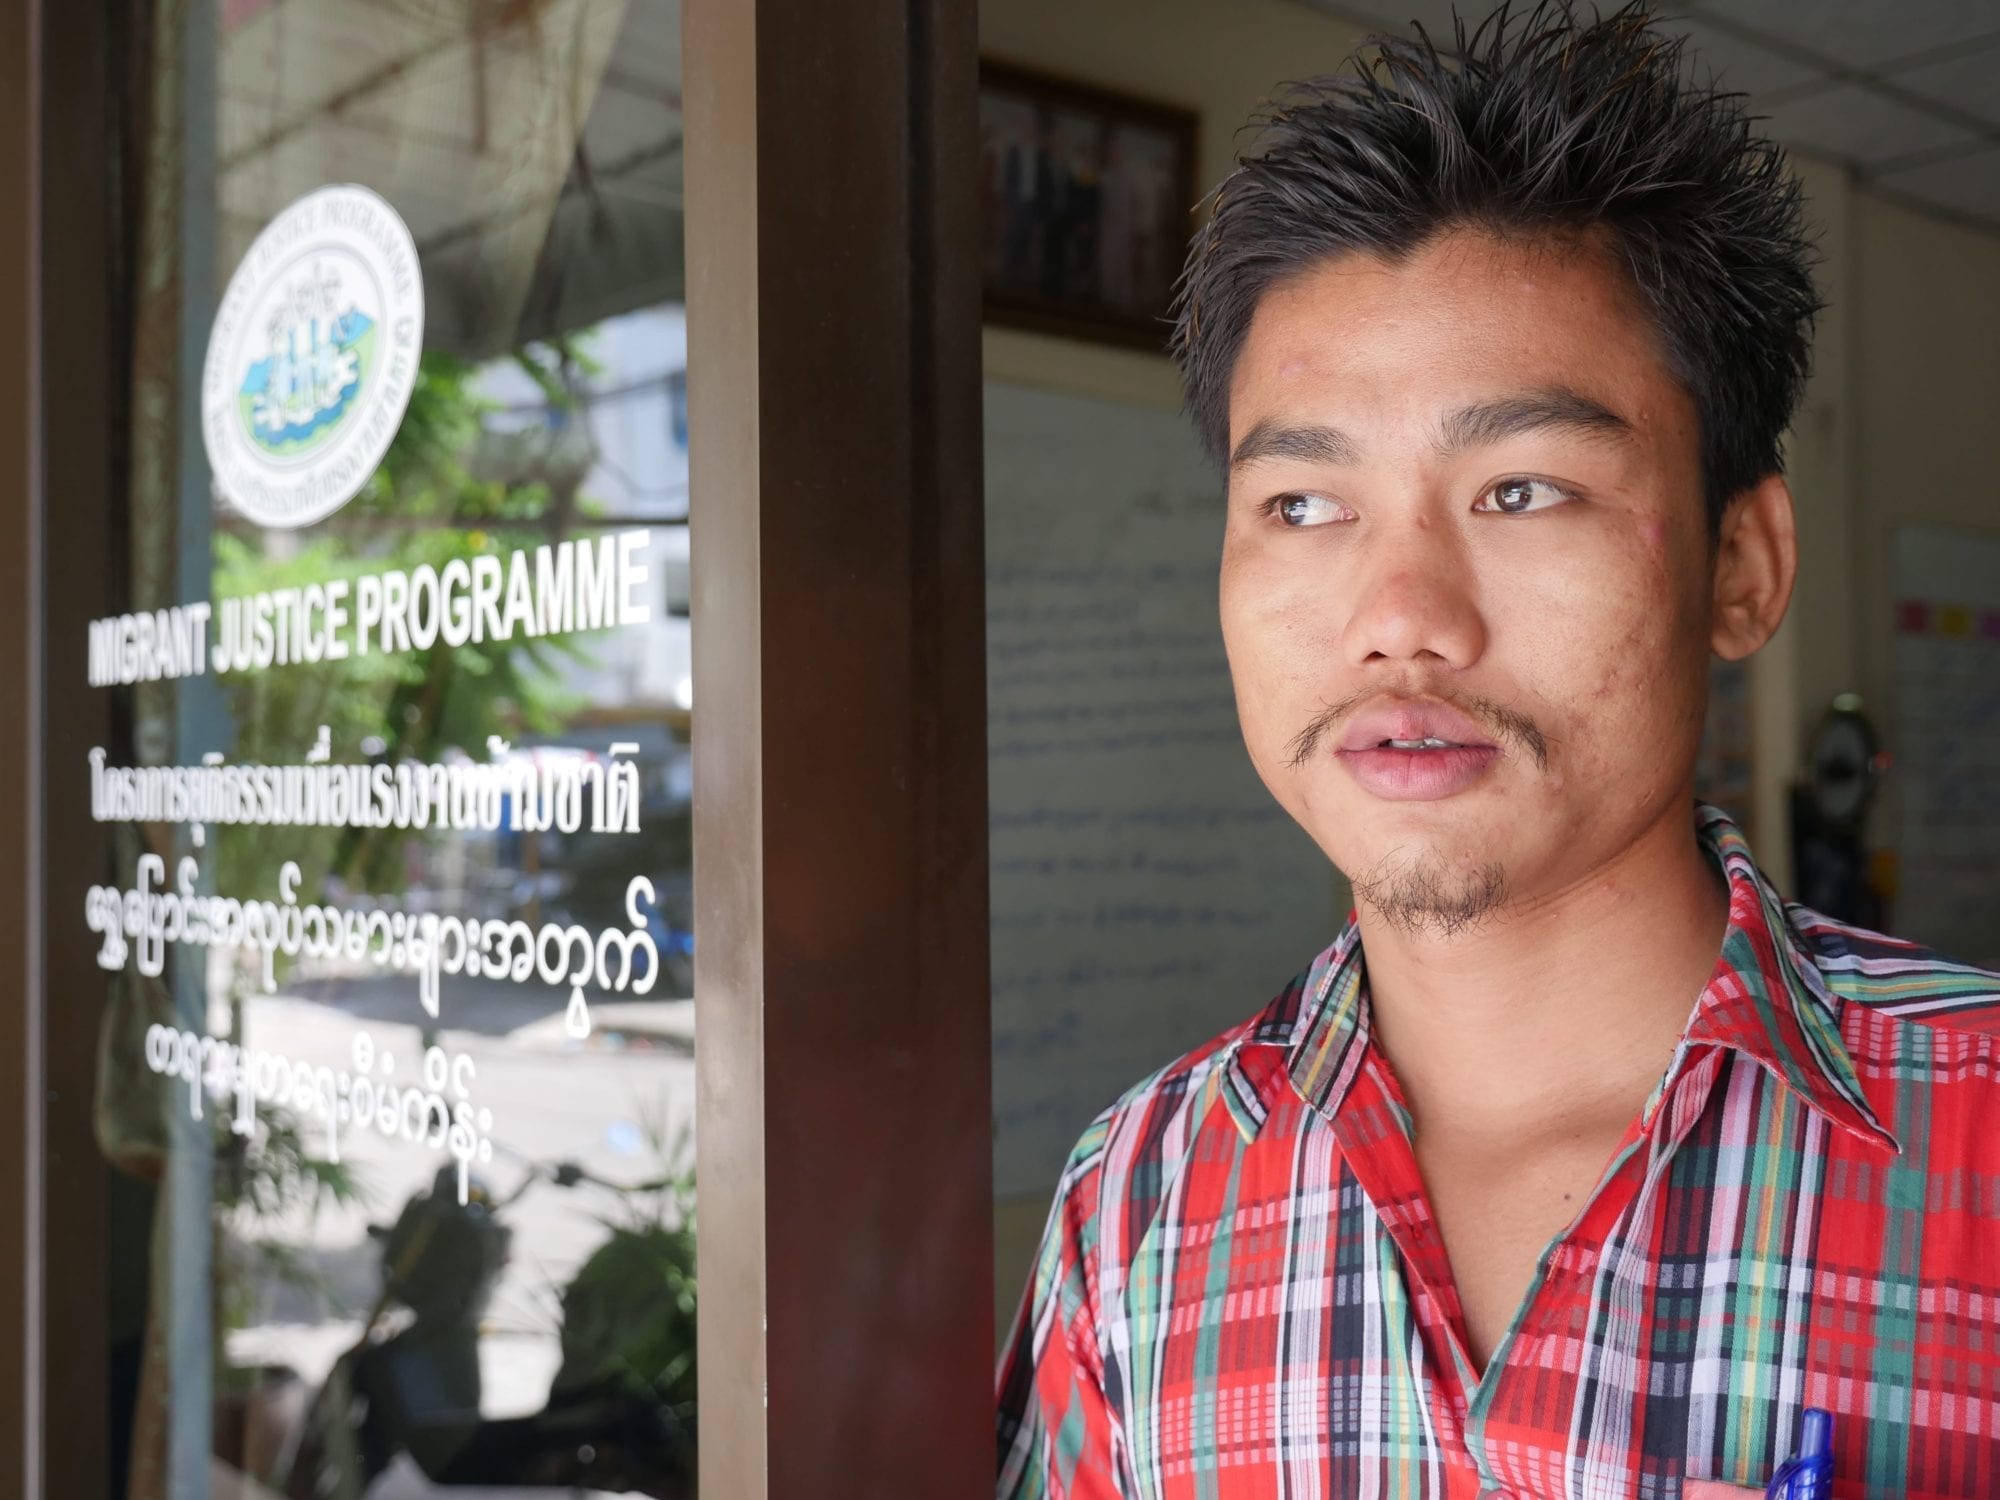 We assisted Naing Lin, a Burmese migrant worker, in getting worker compensation after he lost his hand while working at a plastics factory. The Solidarity Center supports local resource centers such as HRDF and MWRN in Thailand that assist migrants